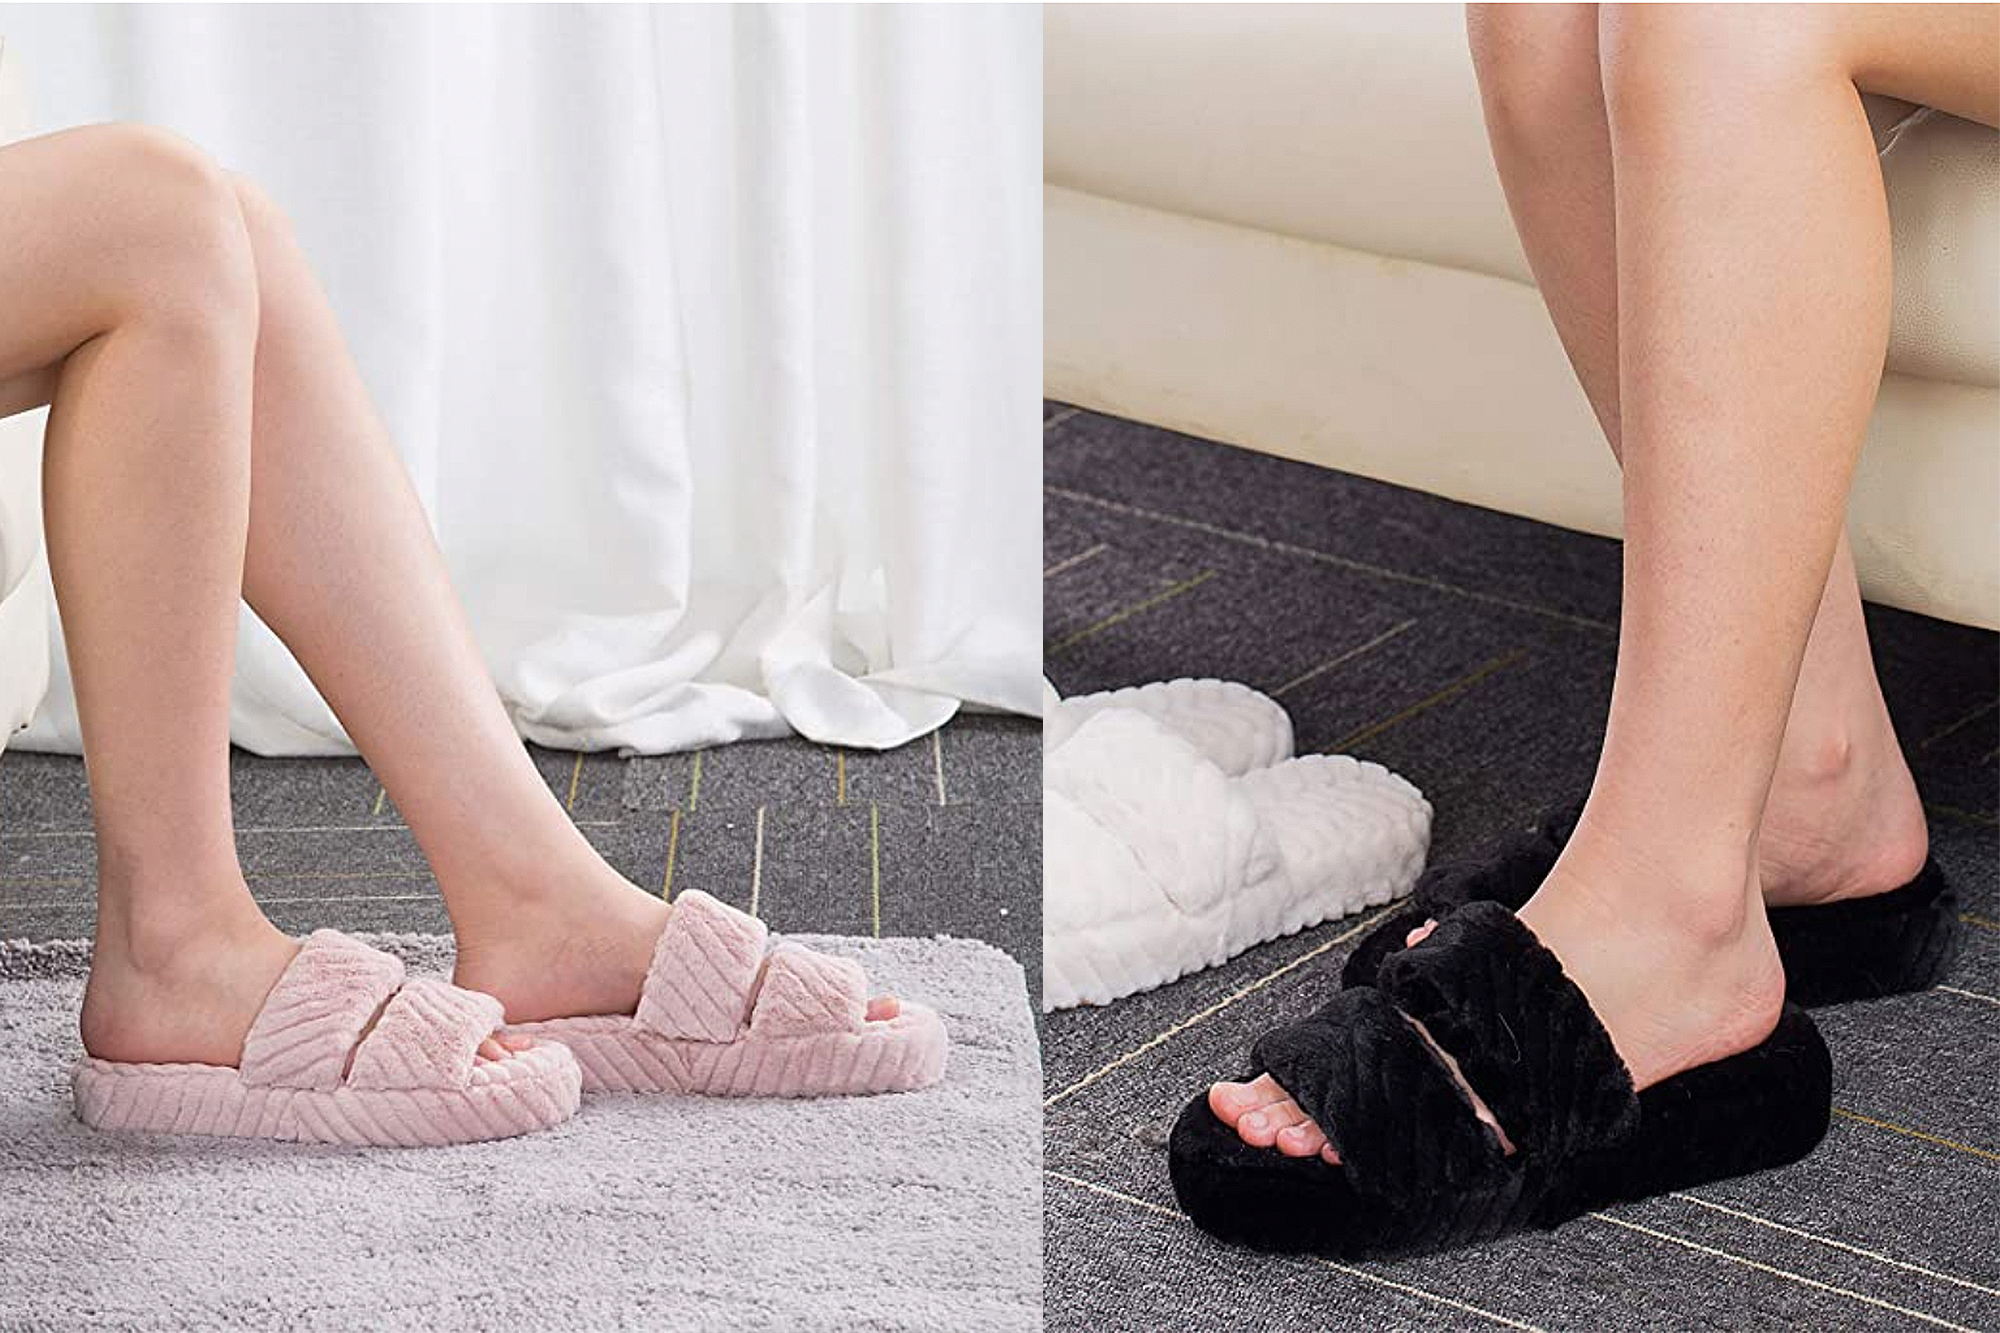 DISOLVE PRESENT Women House Slippers Indoor Fuzzy Fluffy Furry Cozy Home  Bedroom Comfy Winter Cute Warm Outdoor ShoesFree Size : Amazon.in: Fashion